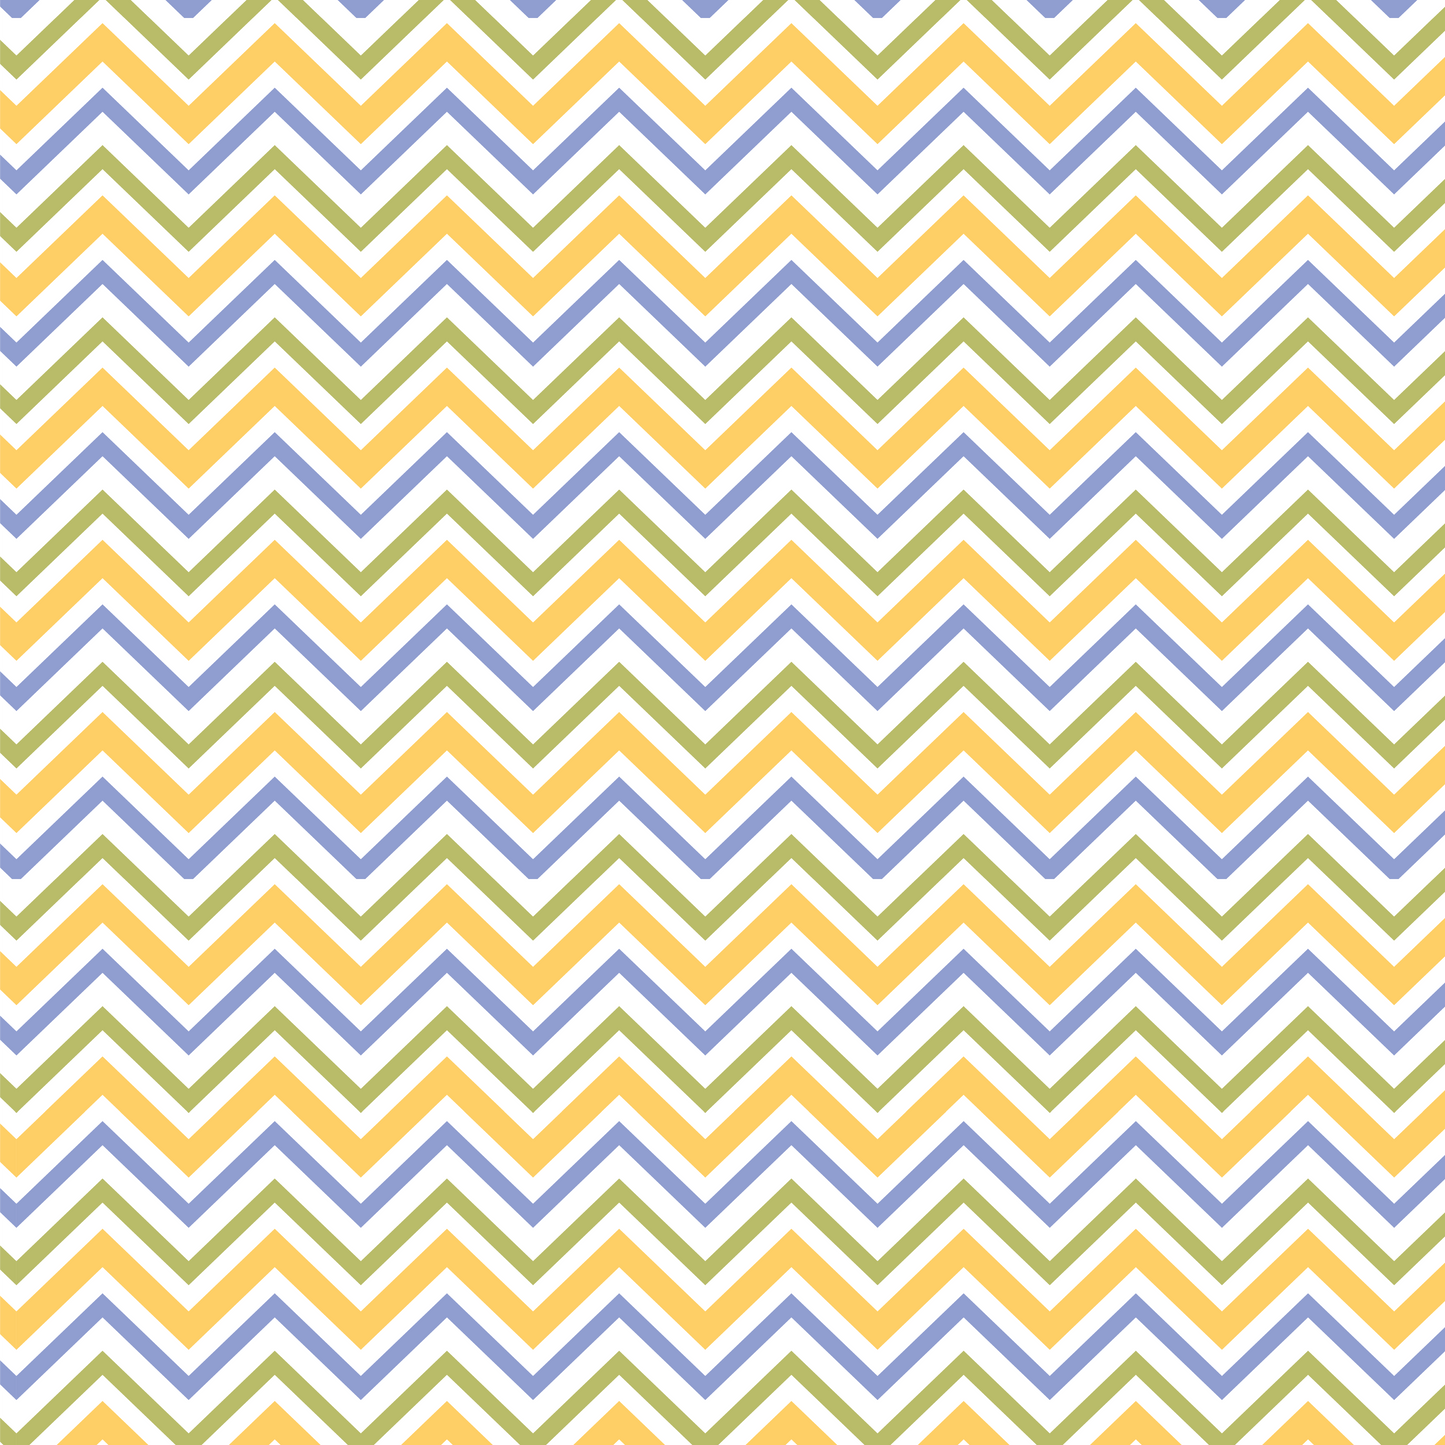 I Love Bees - Colorful Wavy Lines 011